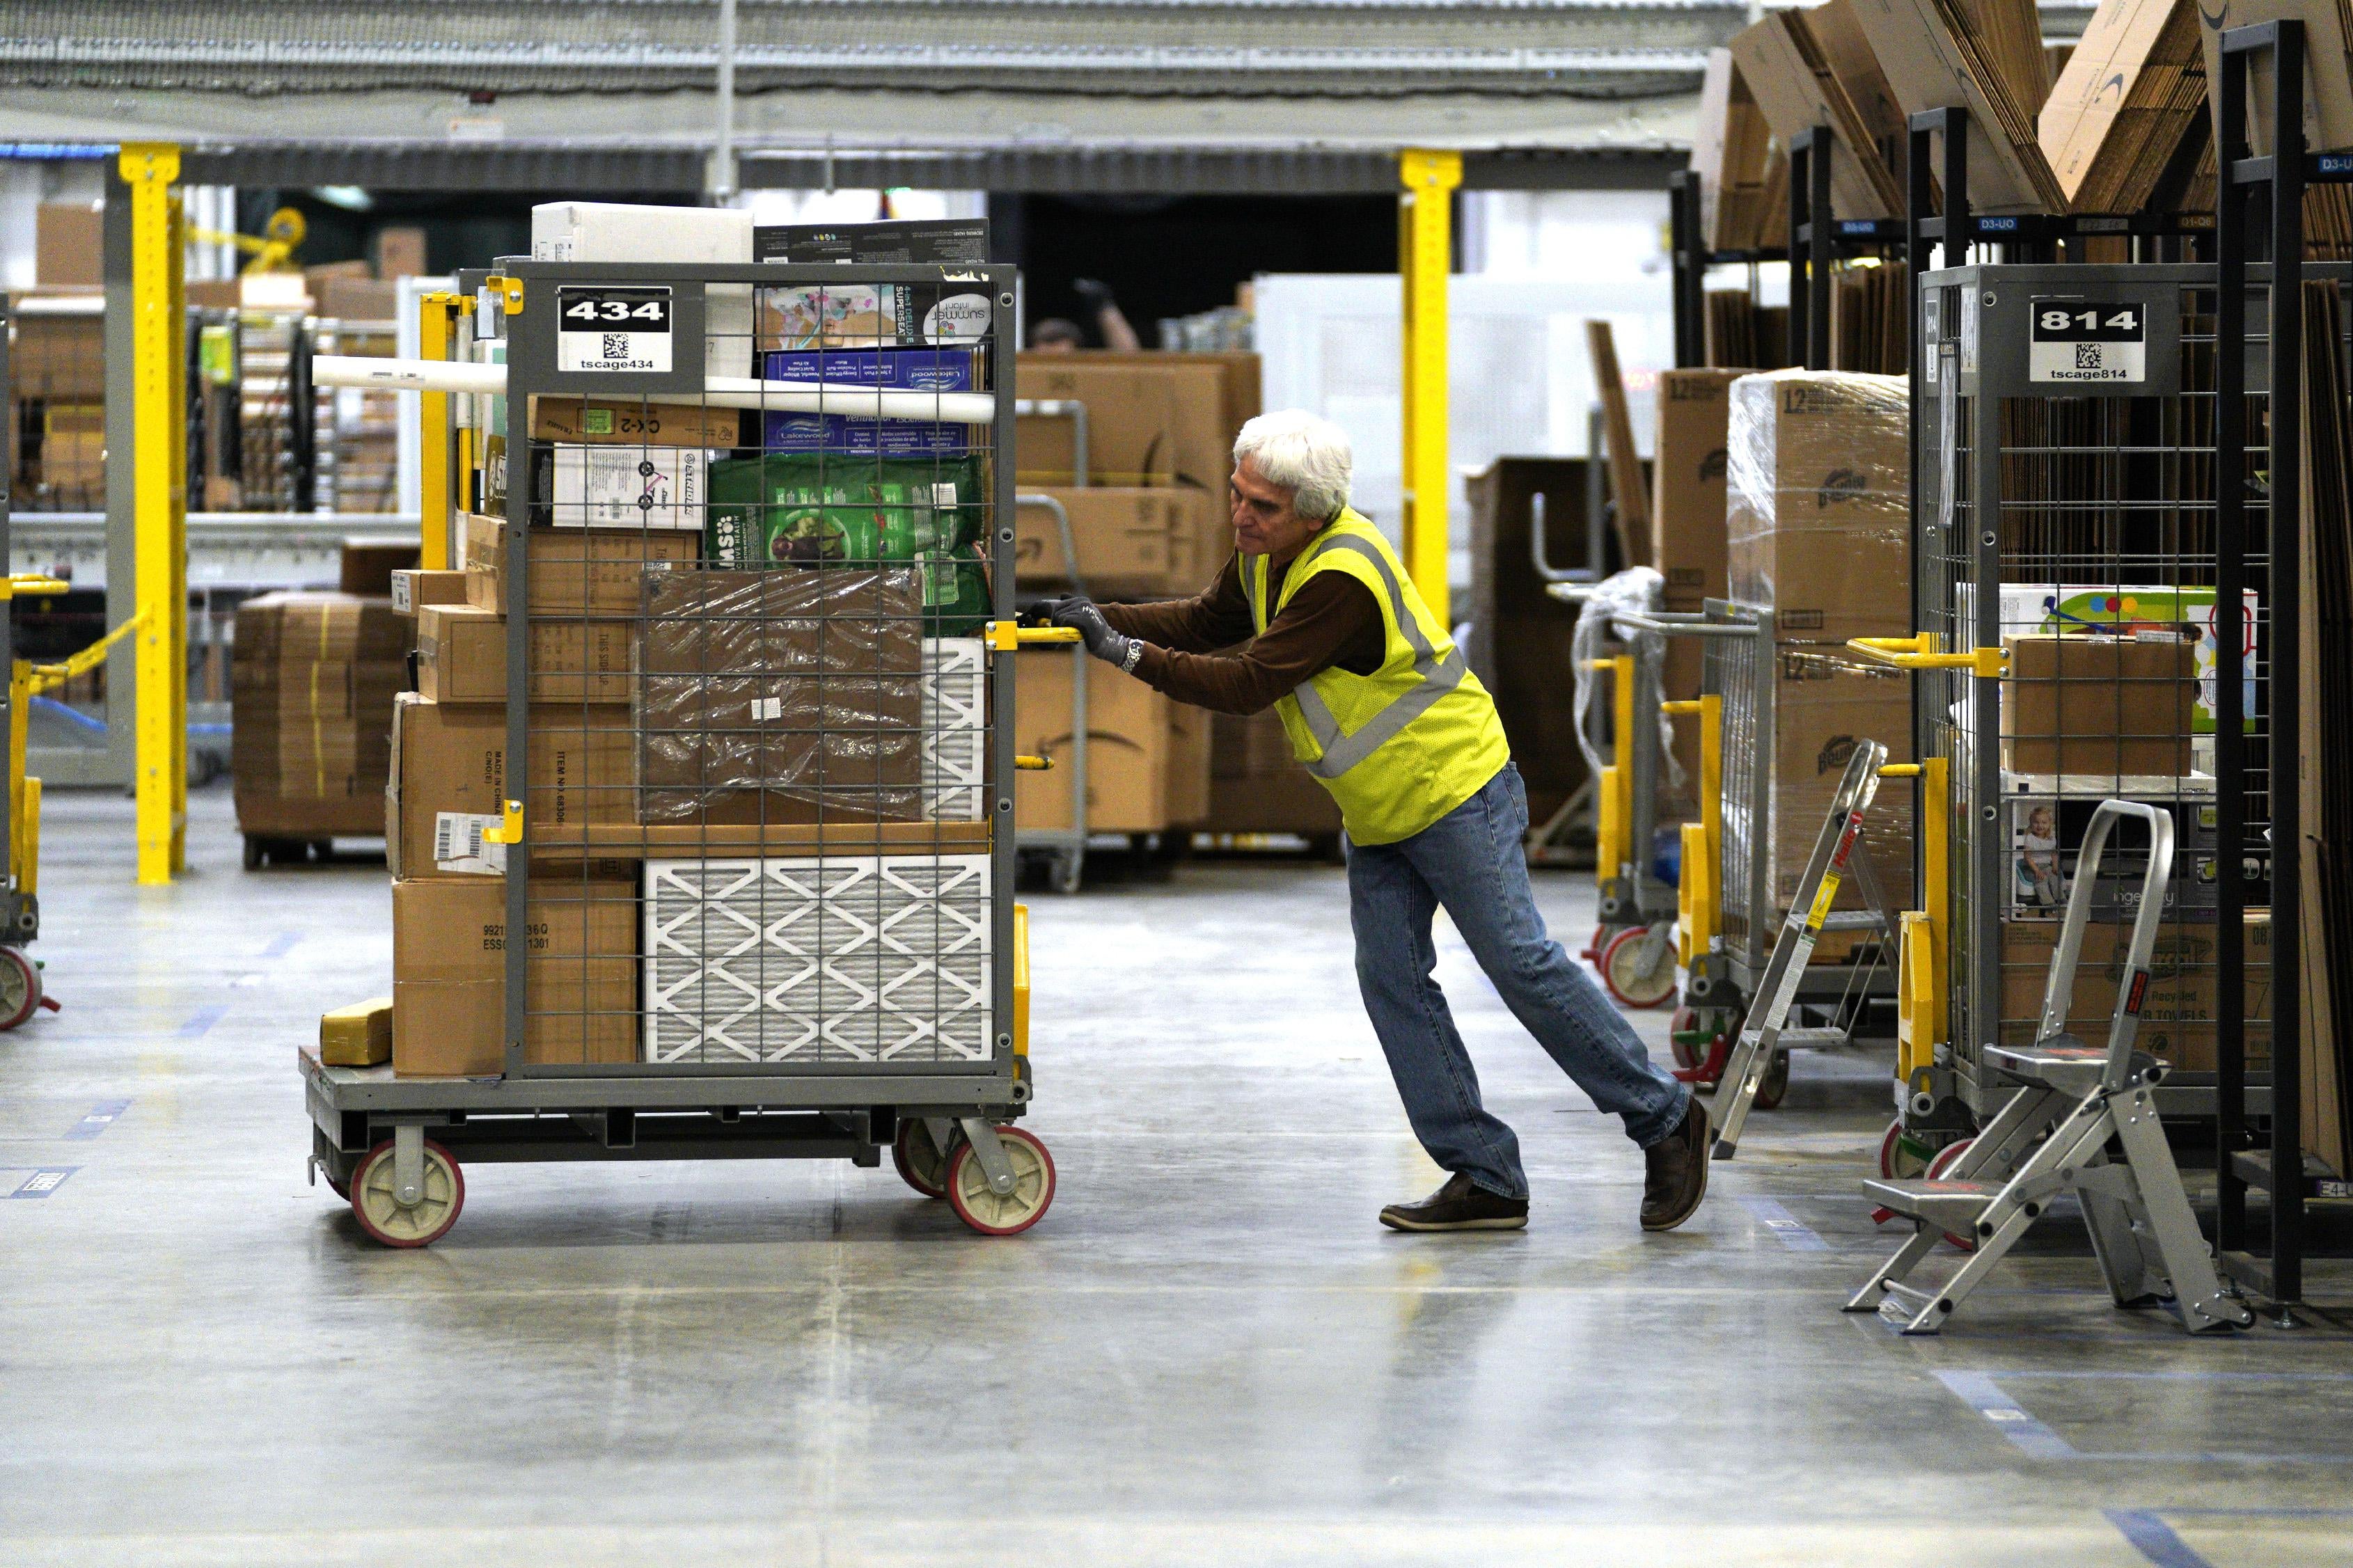 A worker moves boxes at an Amazon fulfillment center.